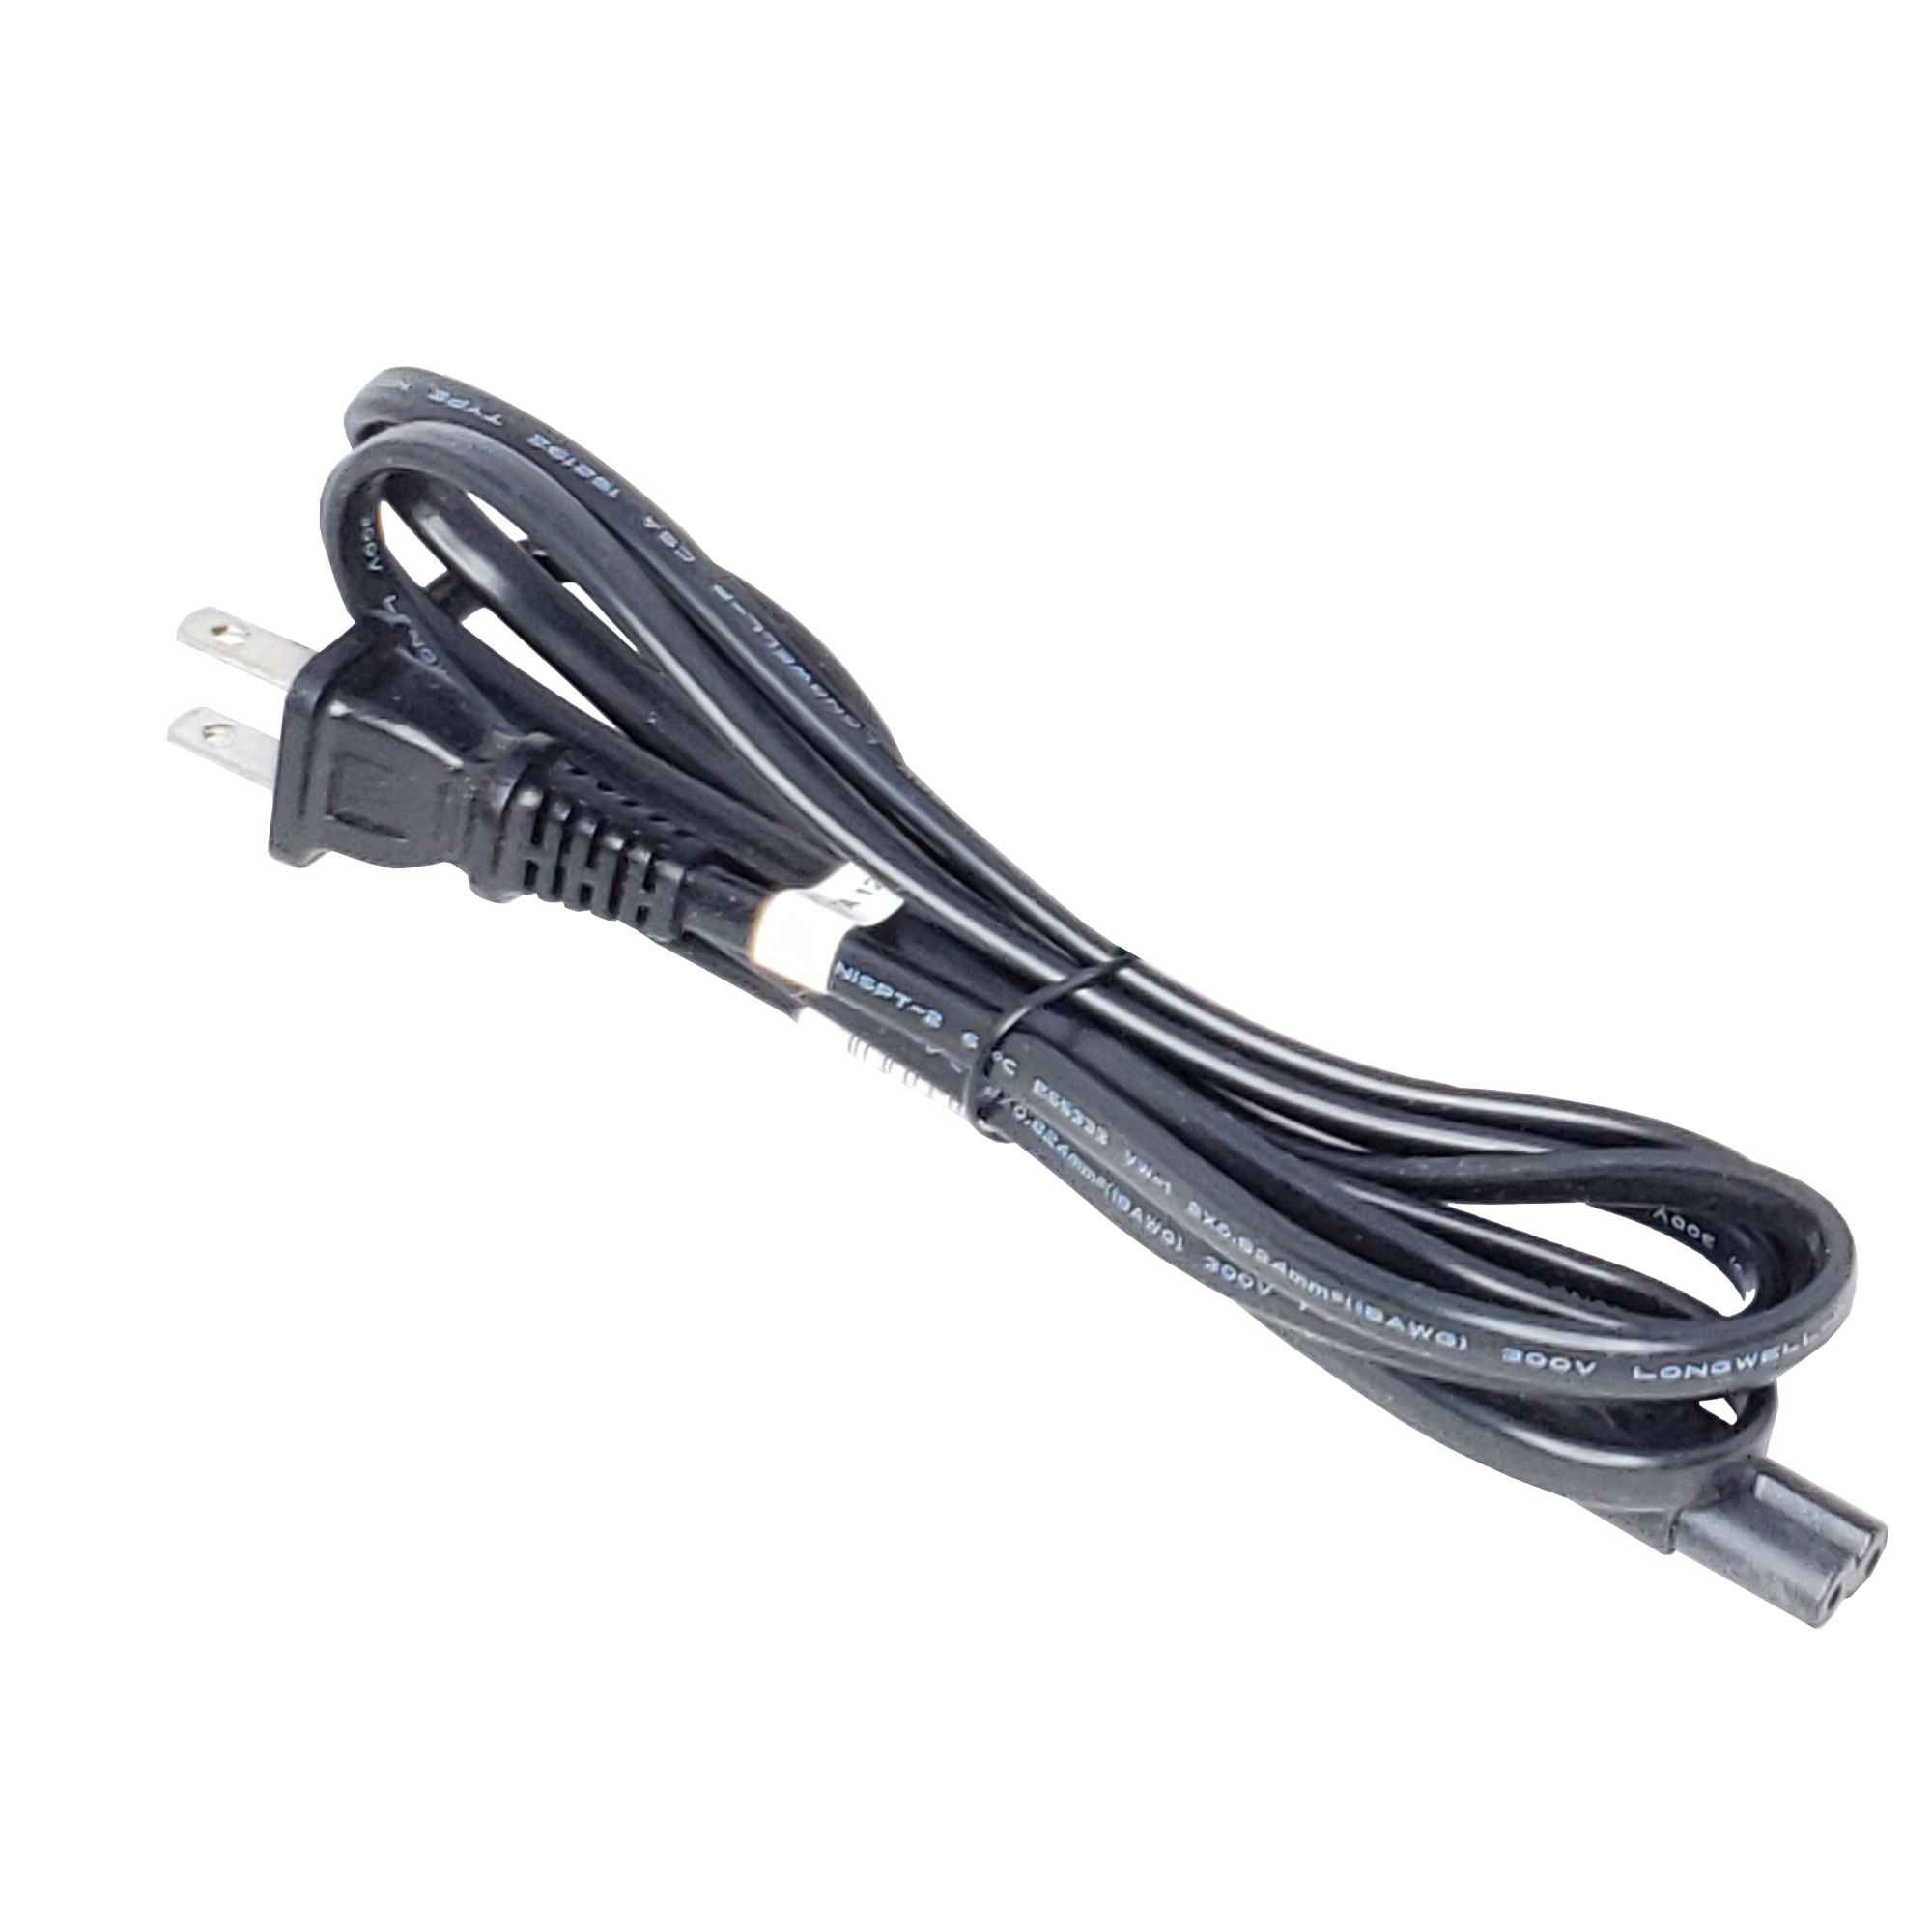 CABLE, iSC480/iCT POWER CORD 